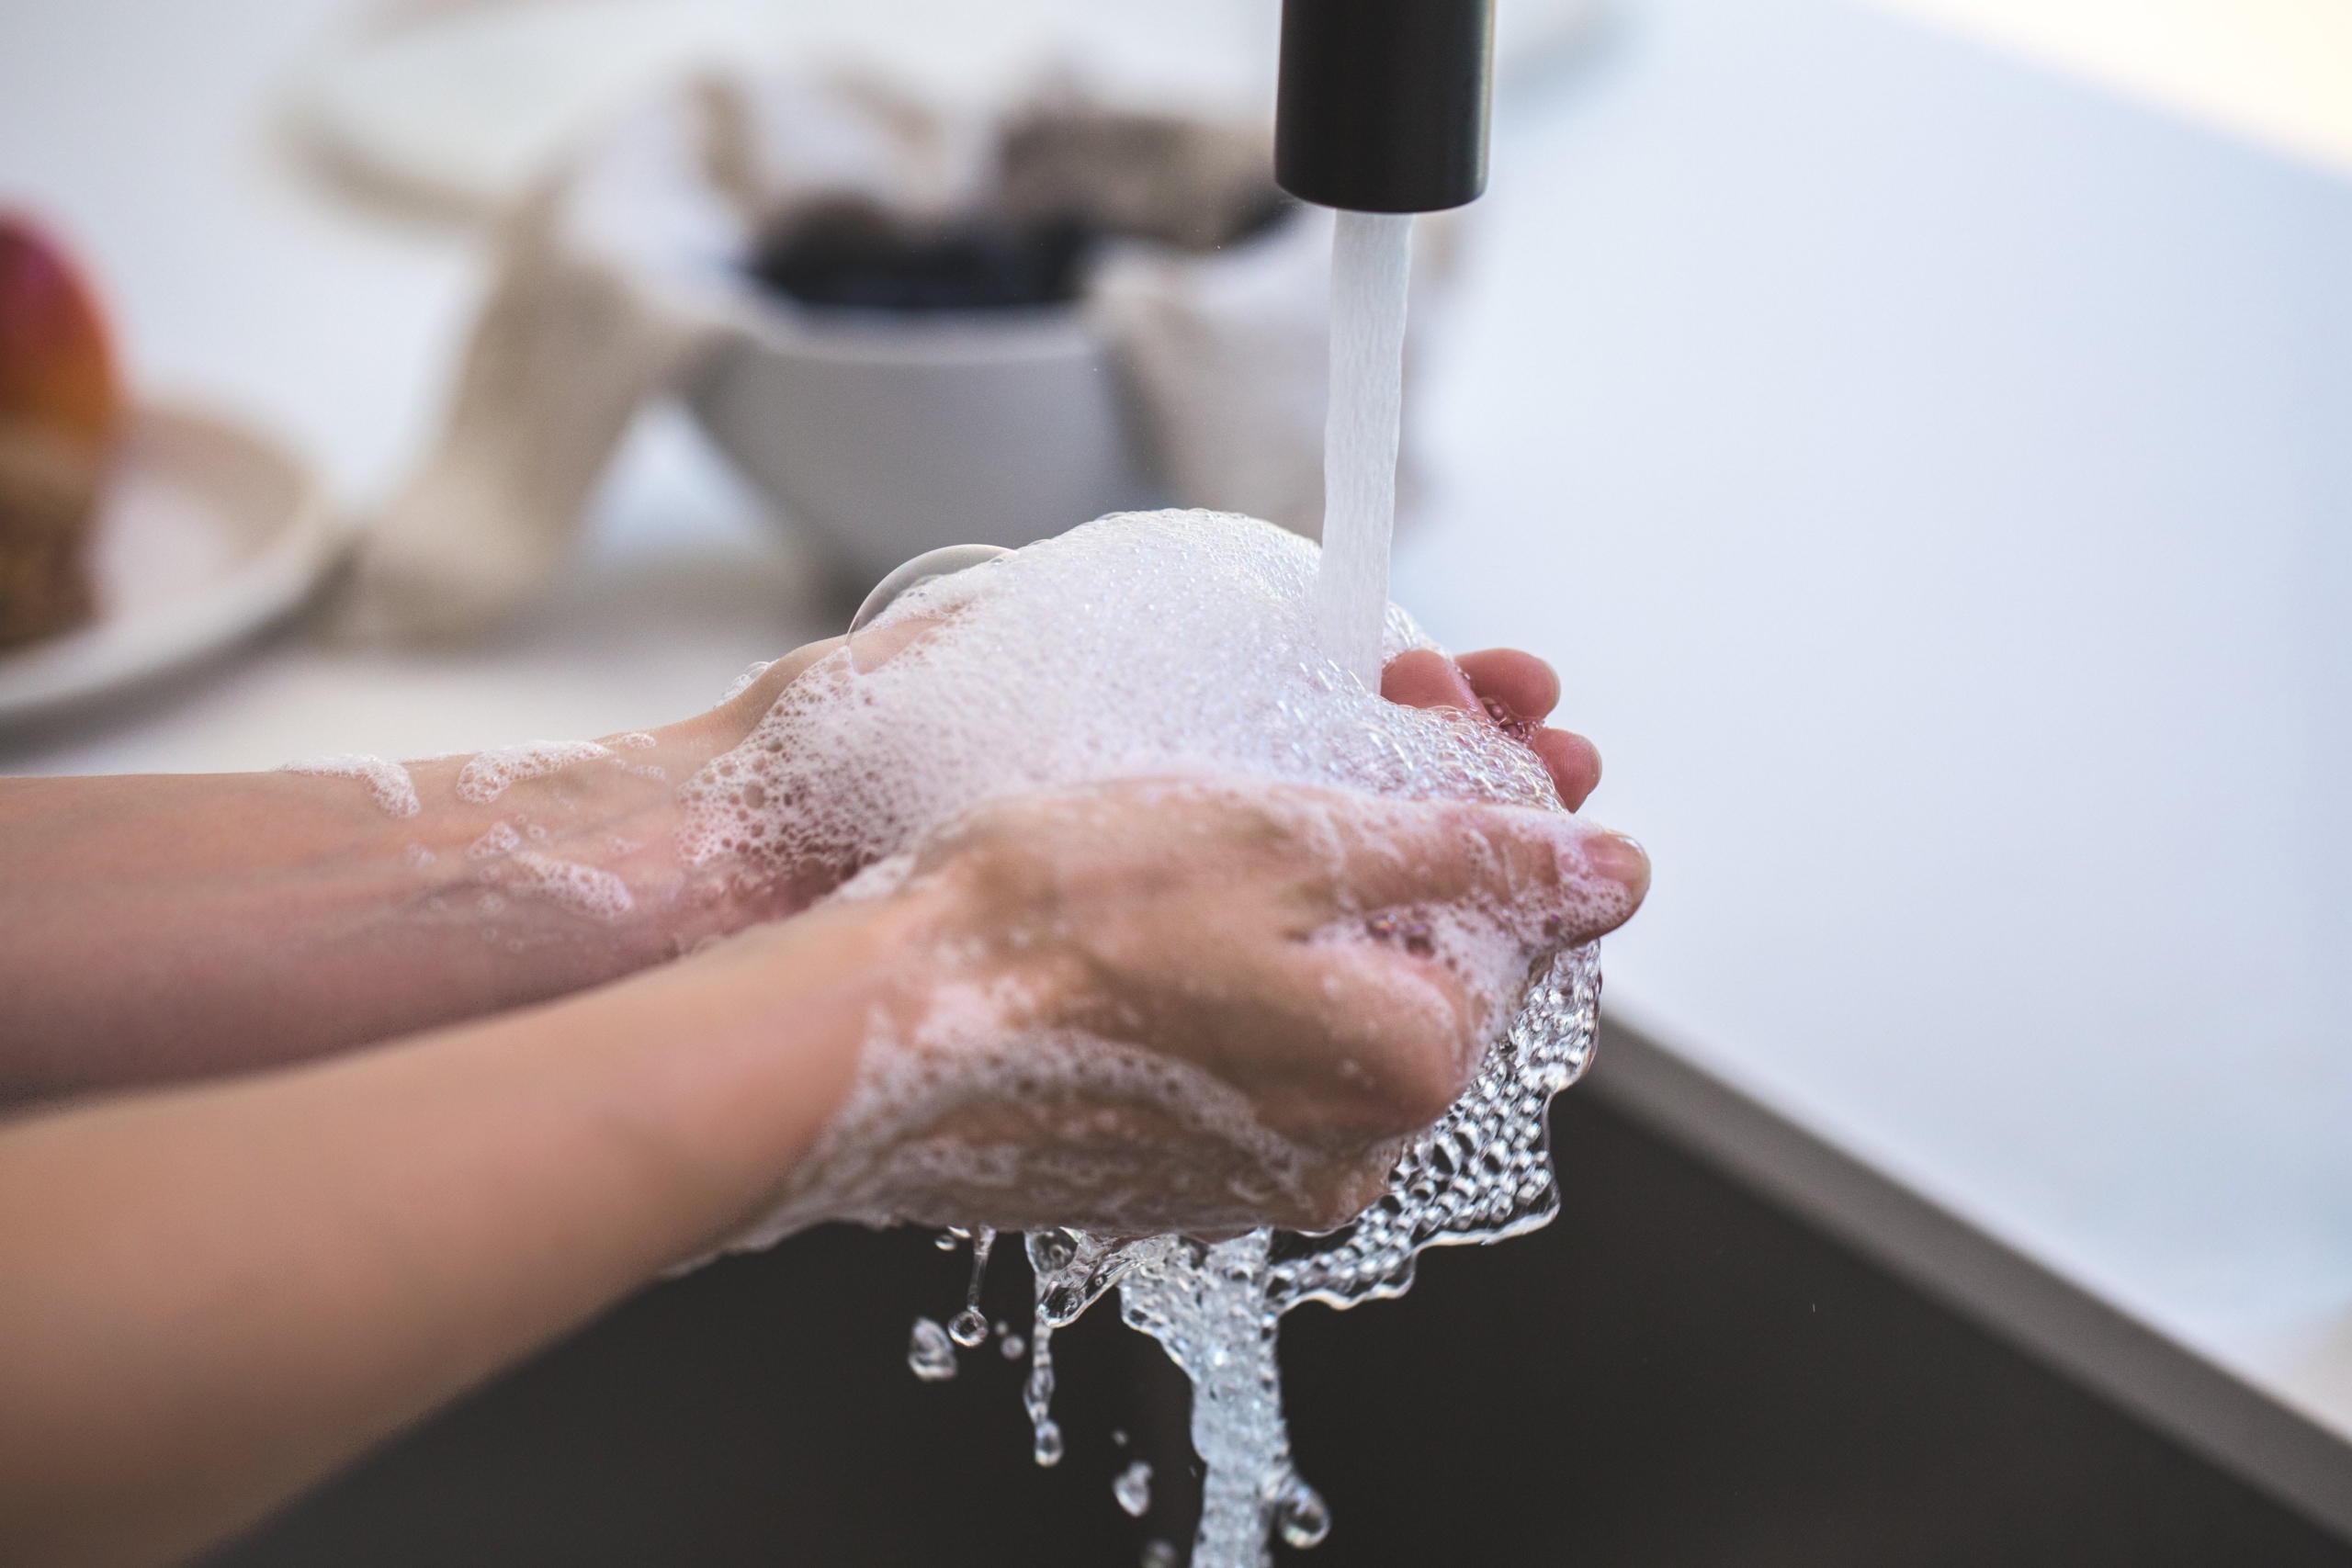 hands cupping soapy water while washing hands thoroughly